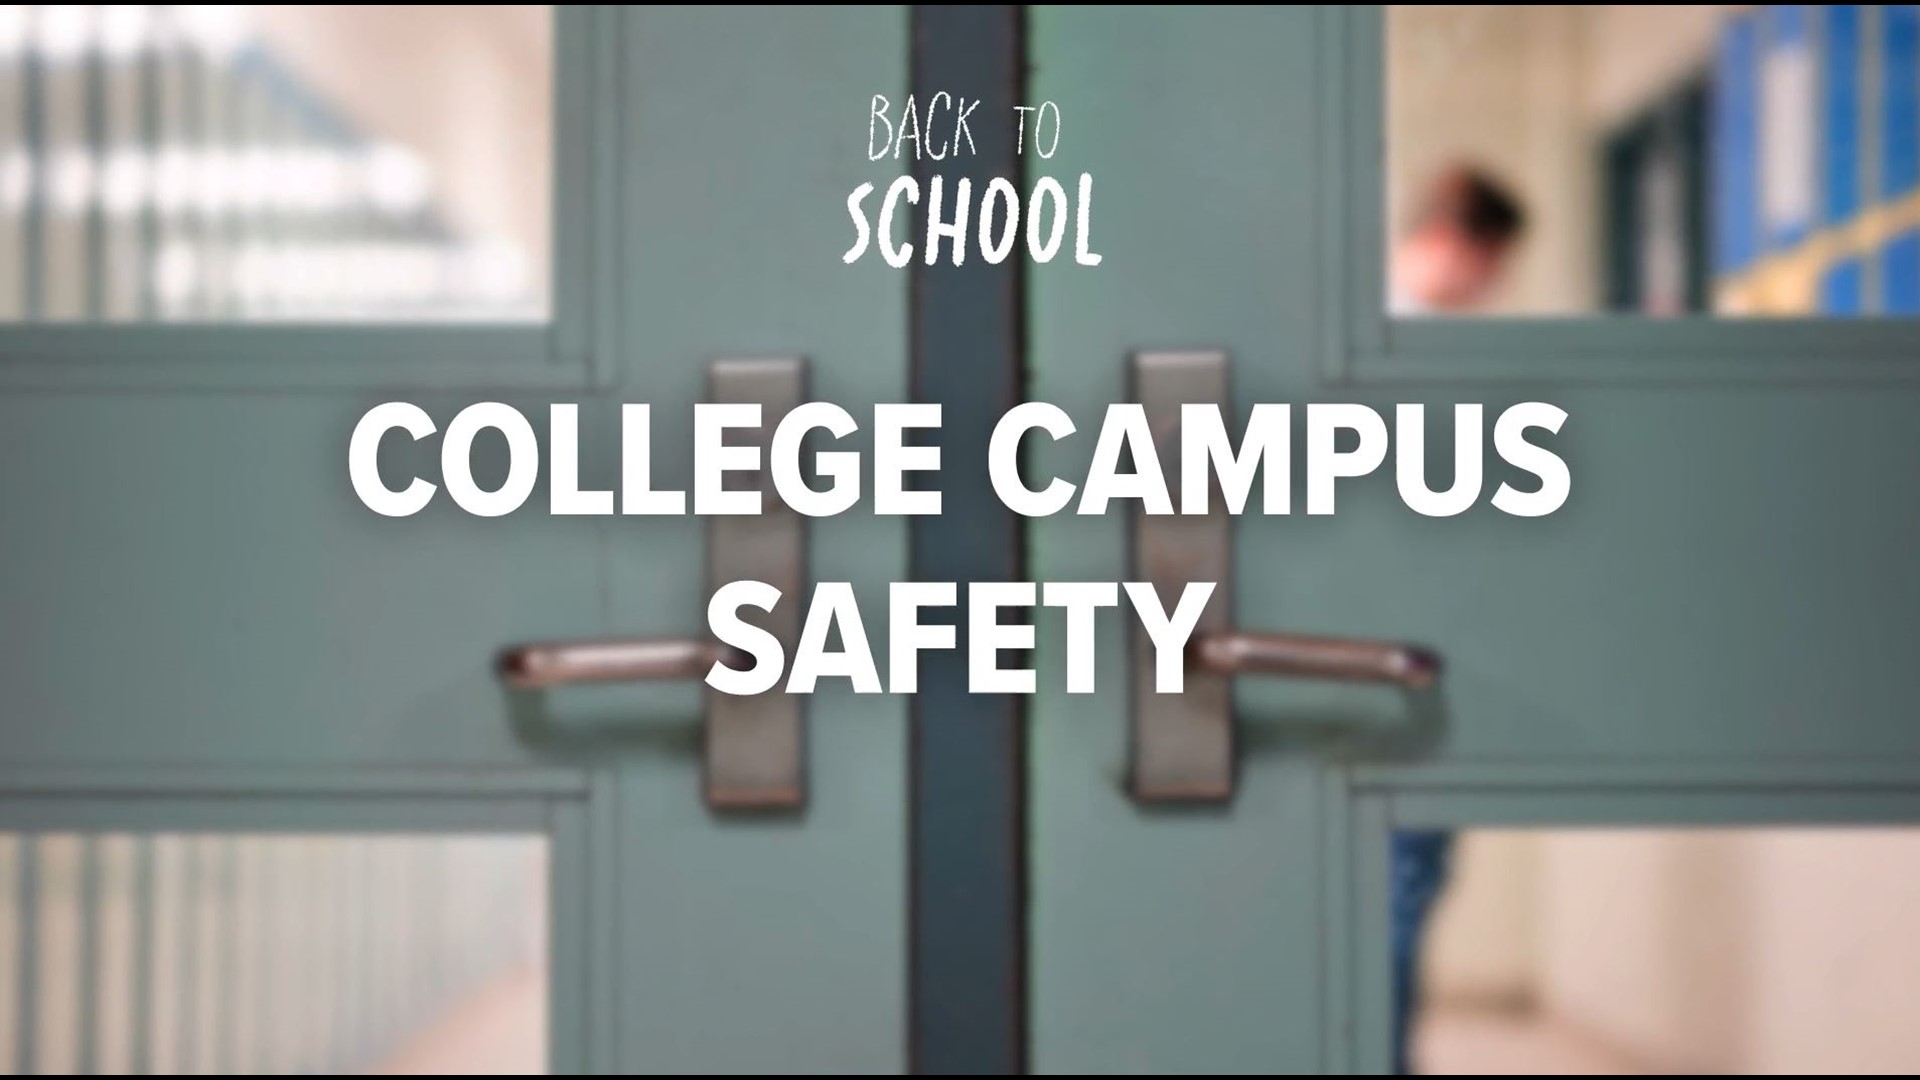 As students prepare to head off to college, we have a look at how some campuses are helping them stay safe. Plus important advice to keep students aware and alert.